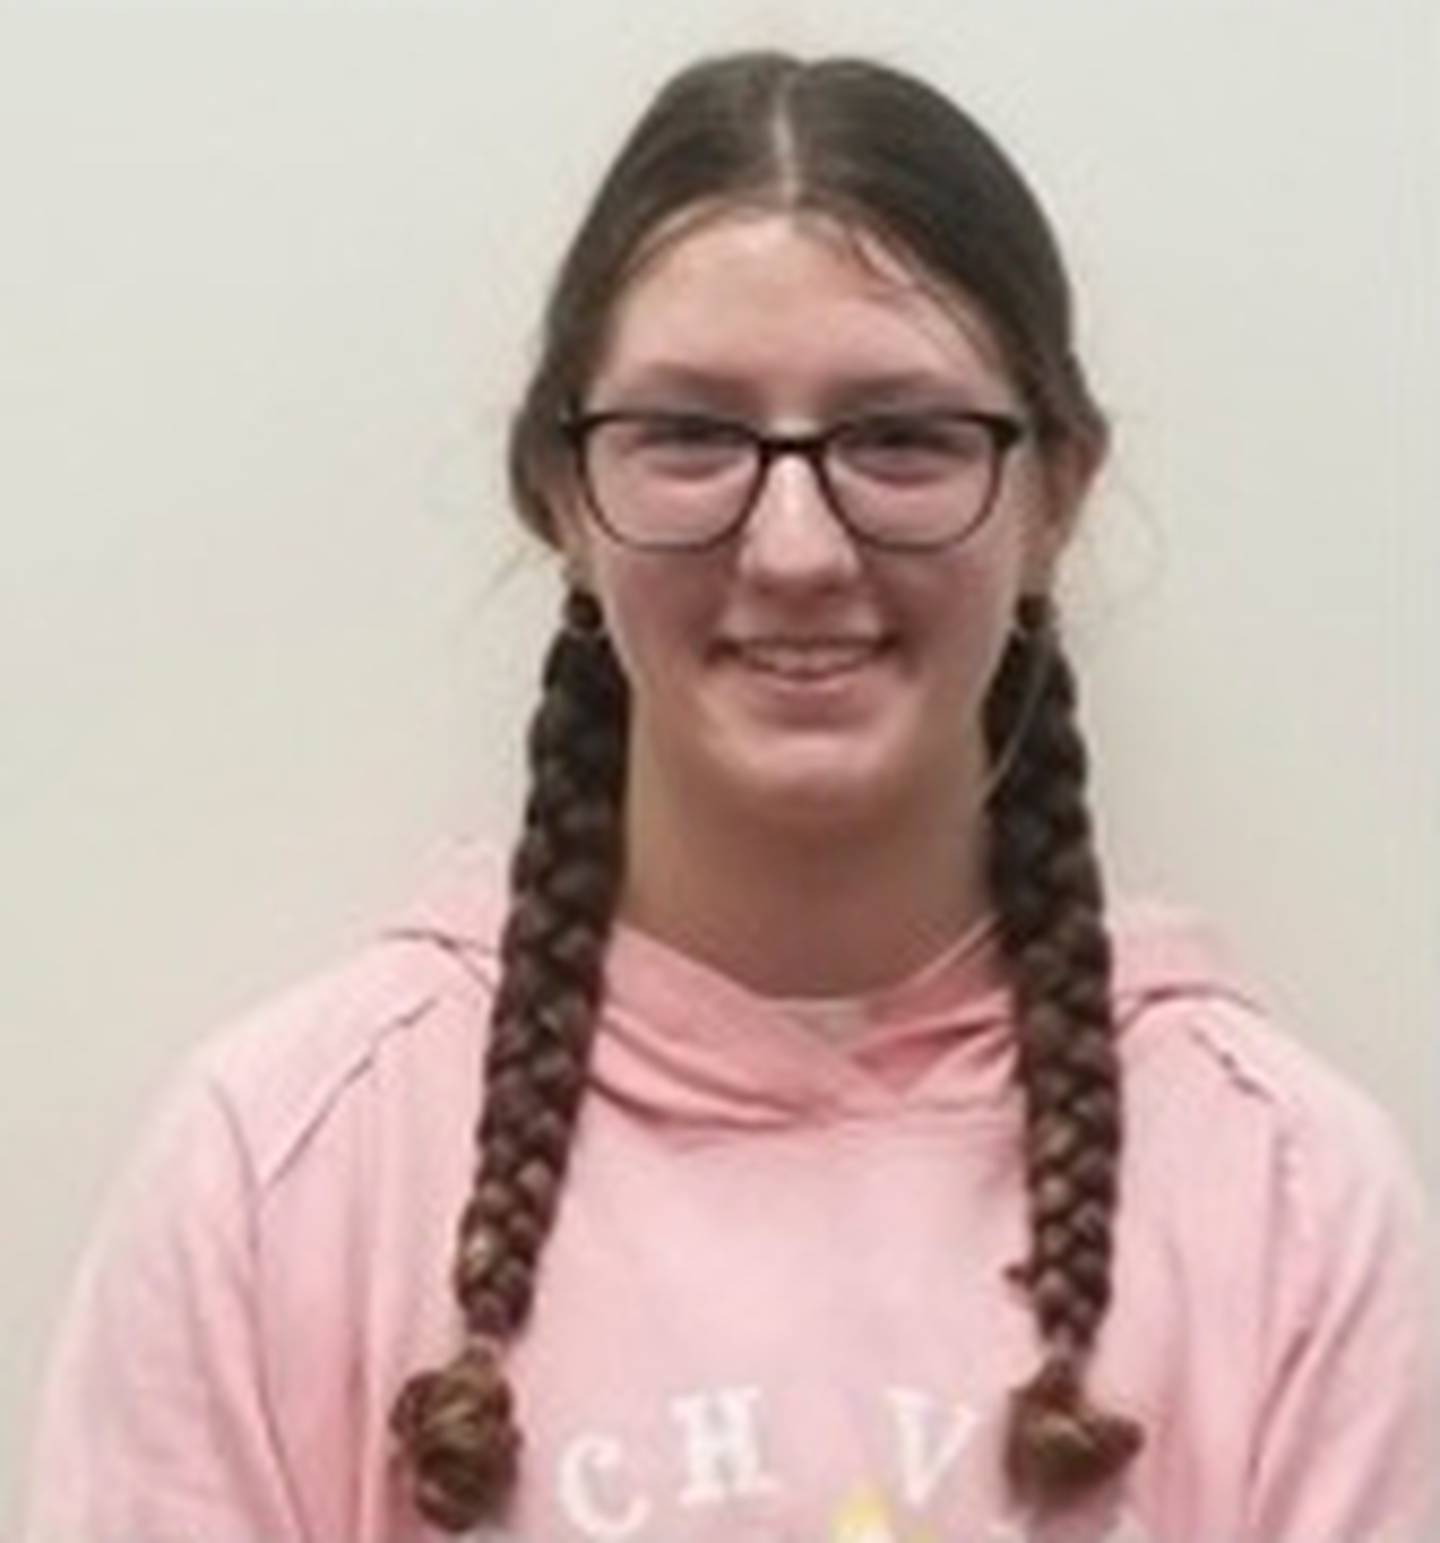 Sycamore Student of the Month for February